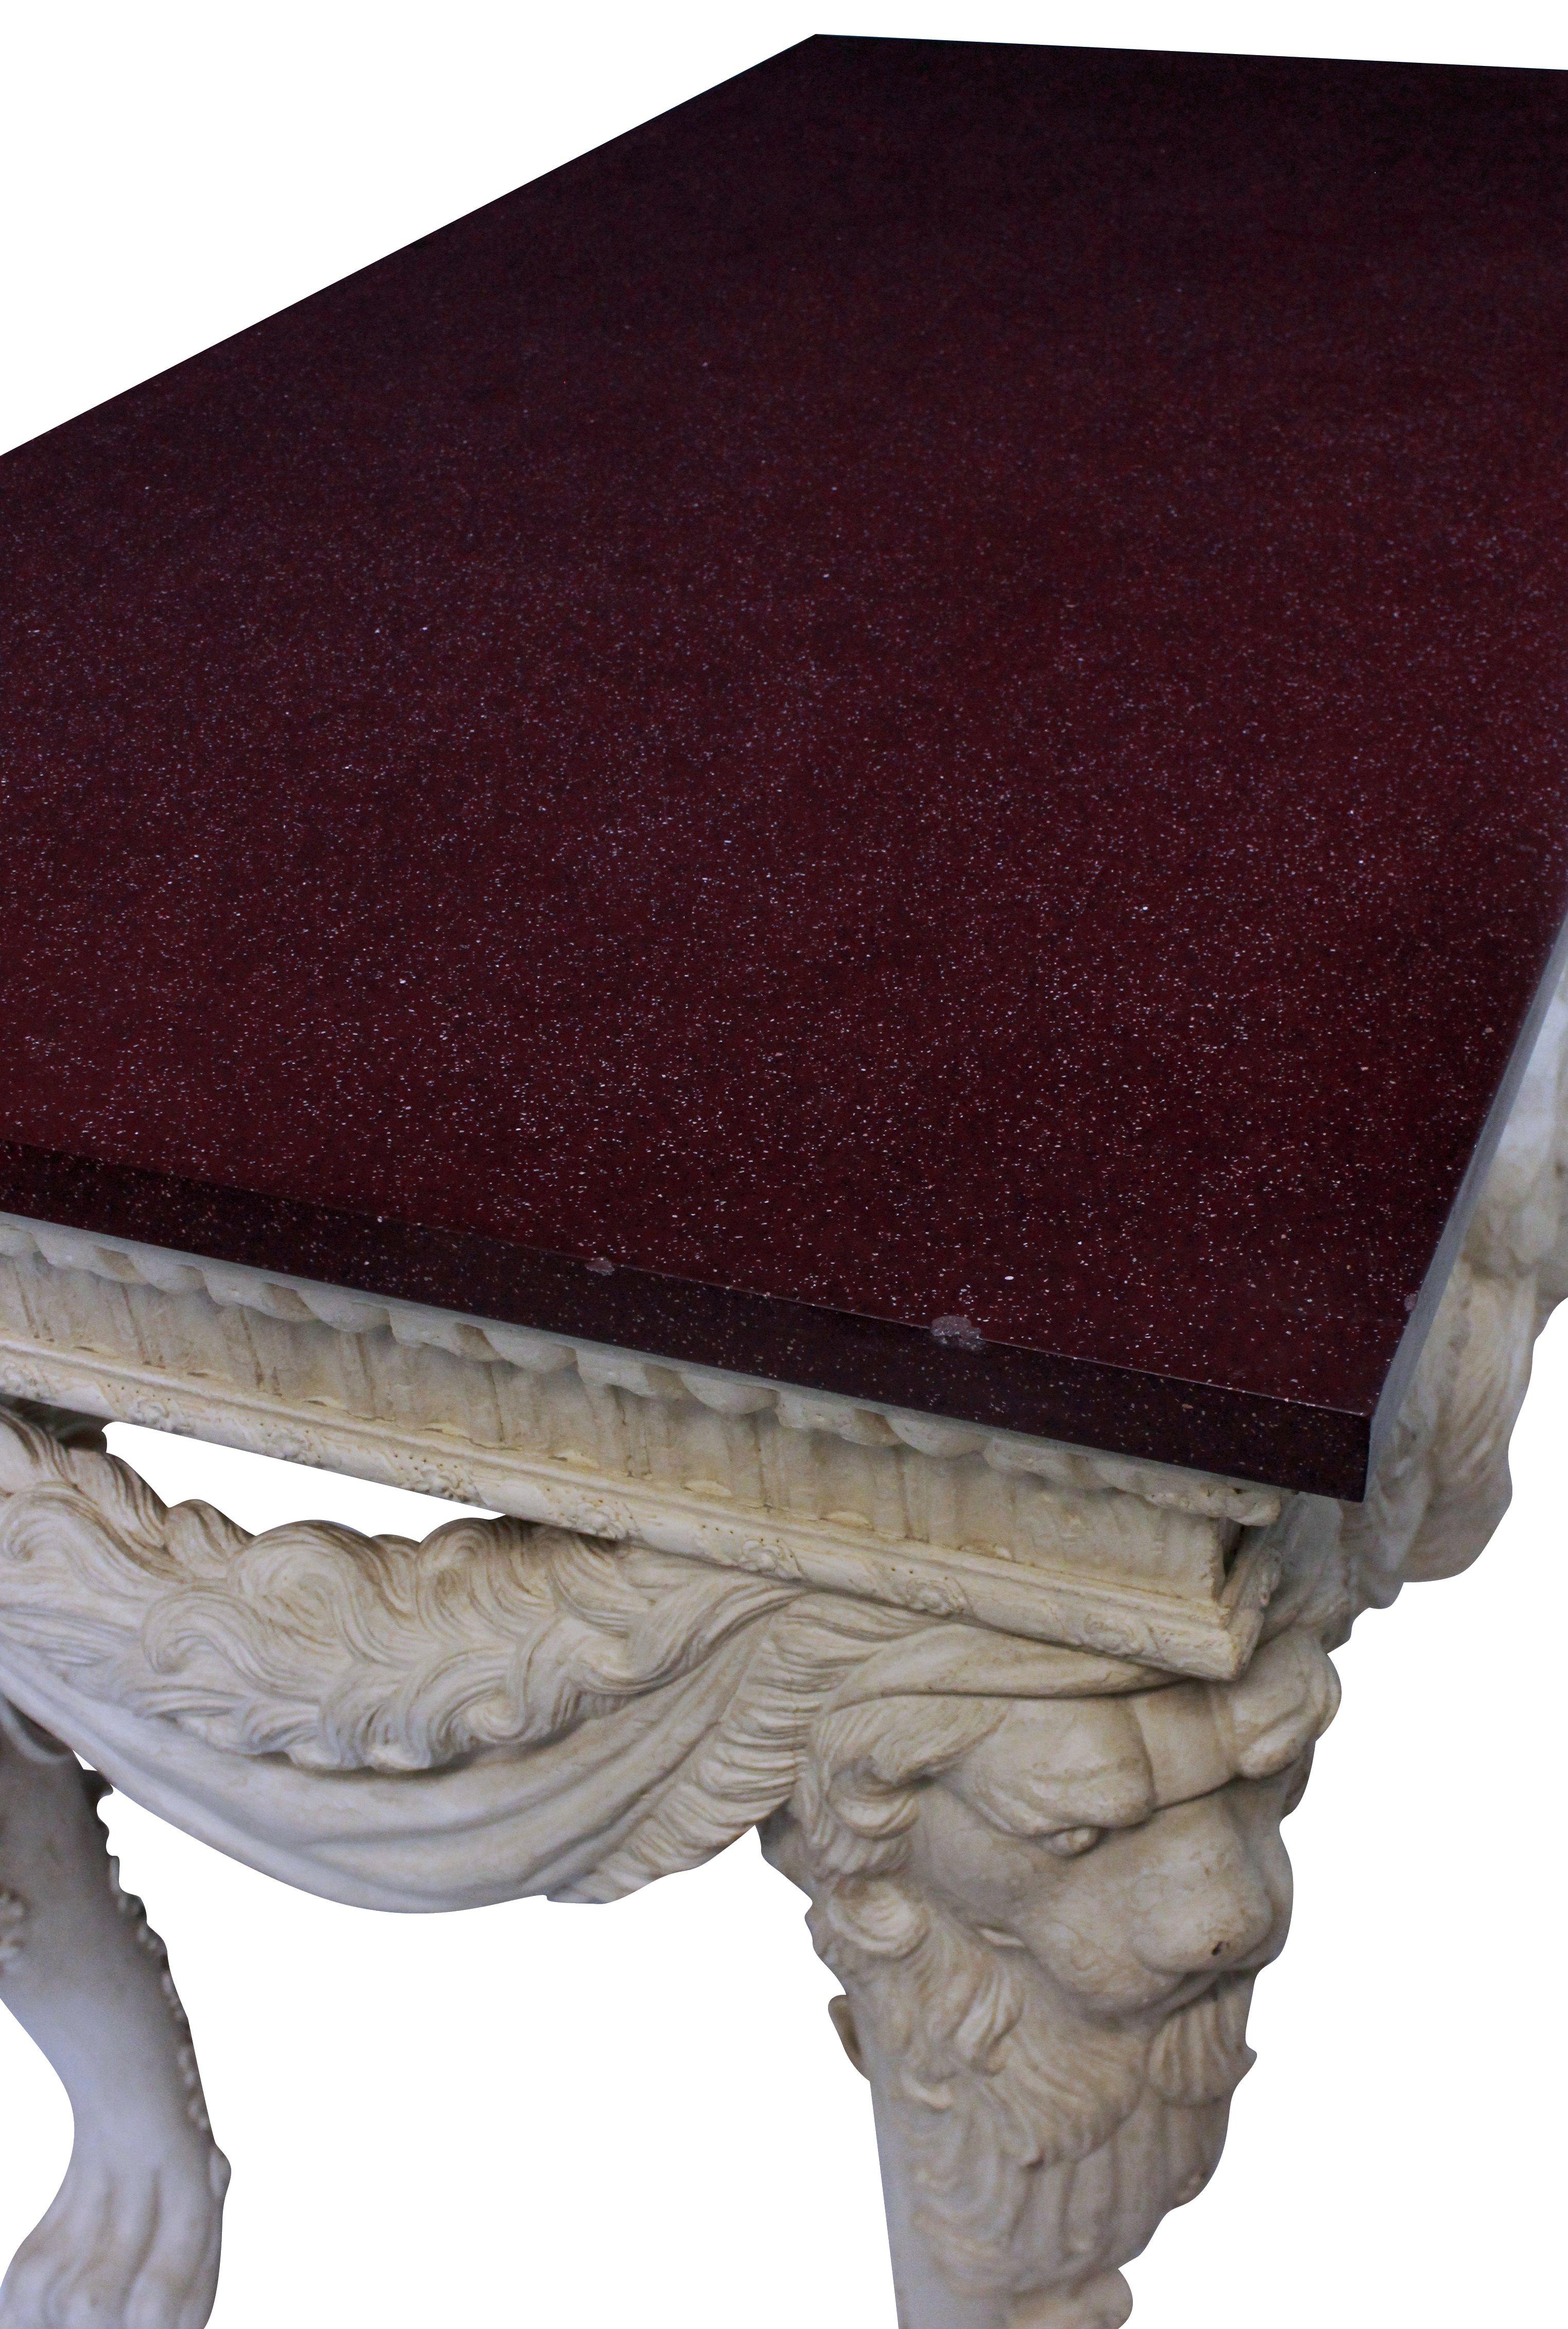 Neoclassical Magnificent County House Console Table with a Solid Porphyry Top